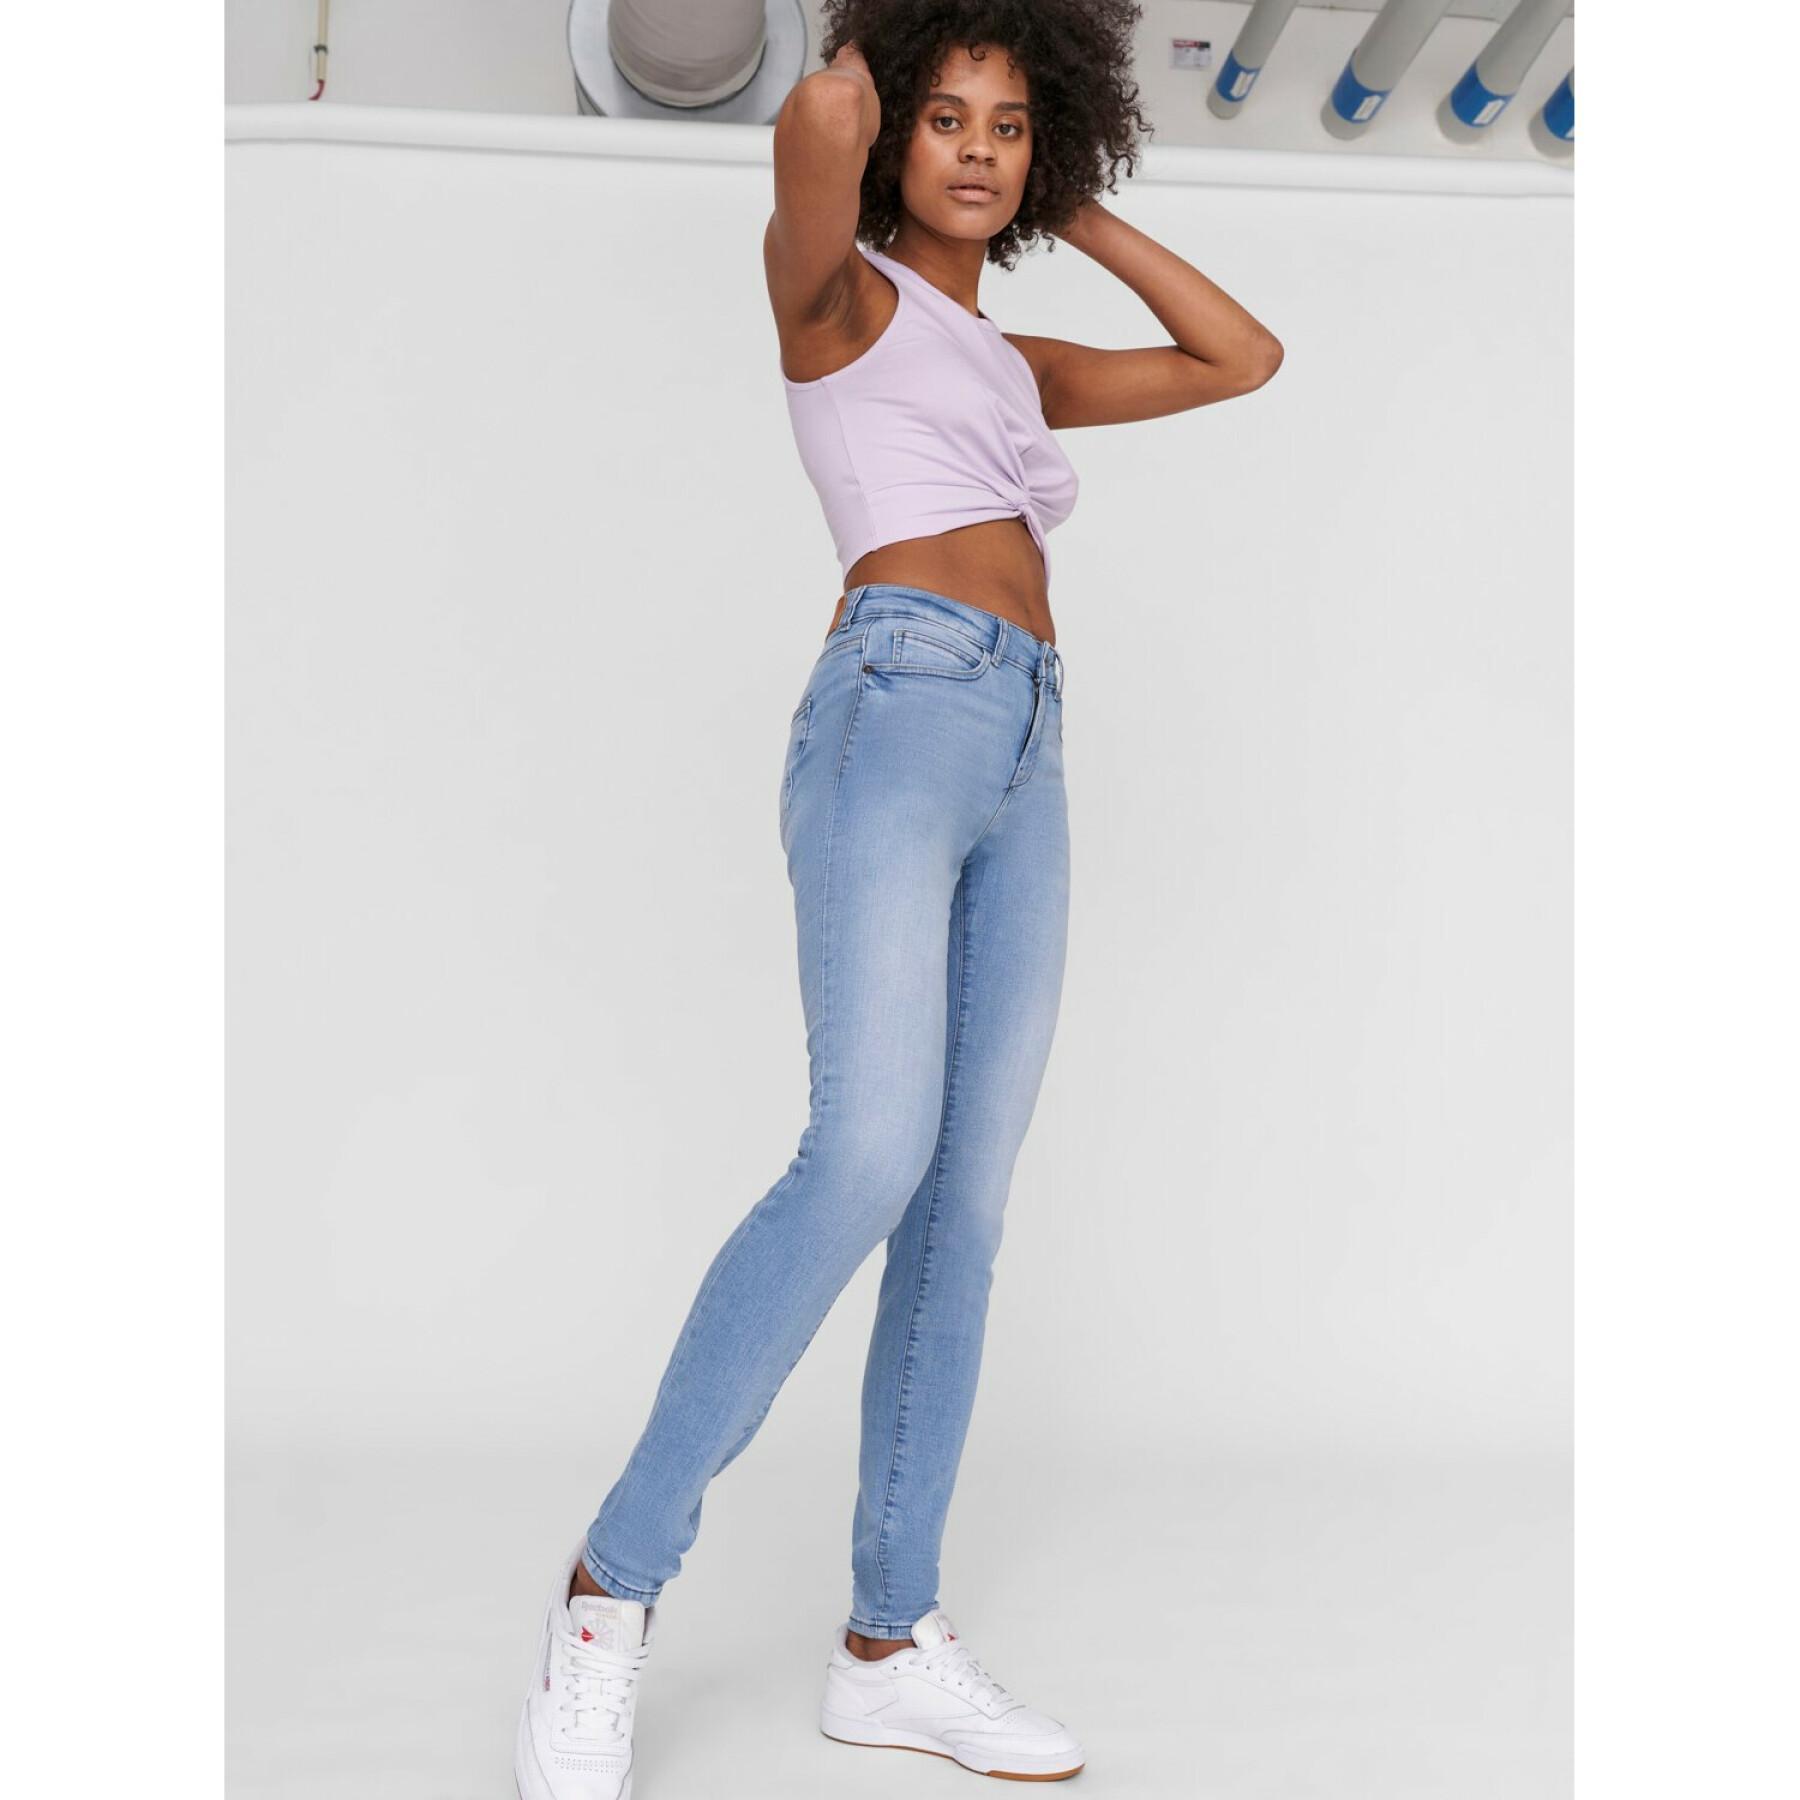 Women's jeans Noisy May nmlucy